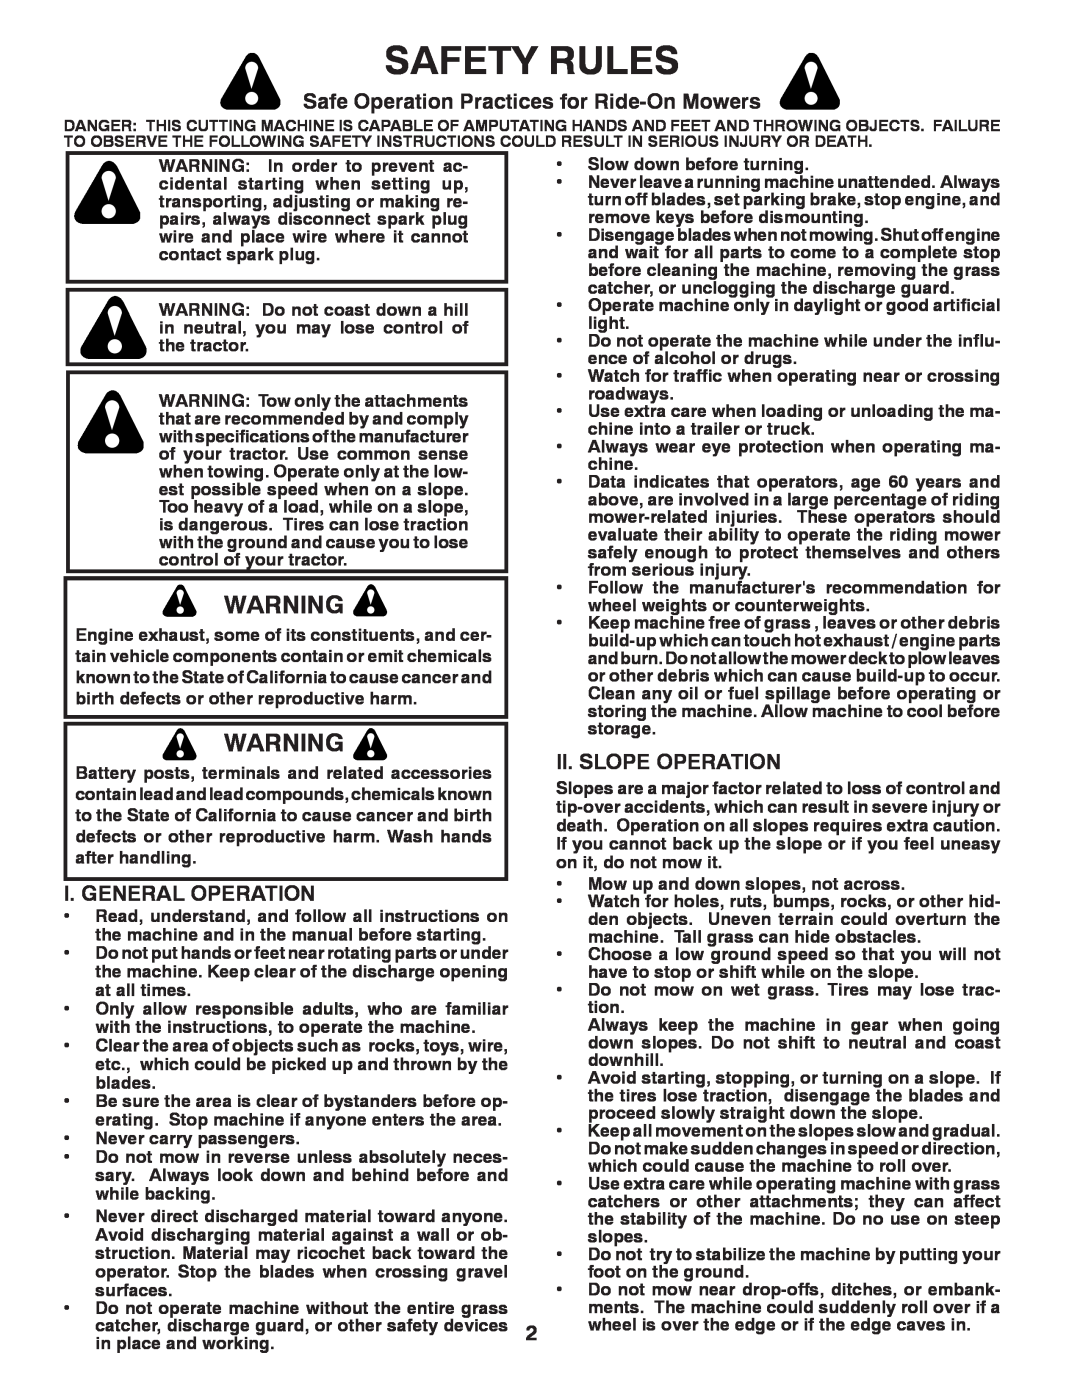 Poulan PB22H54BF Safety Rules, Safe Operation Practices for Ride-On Mowers, I. General Operation, Ii. Slope Operation 